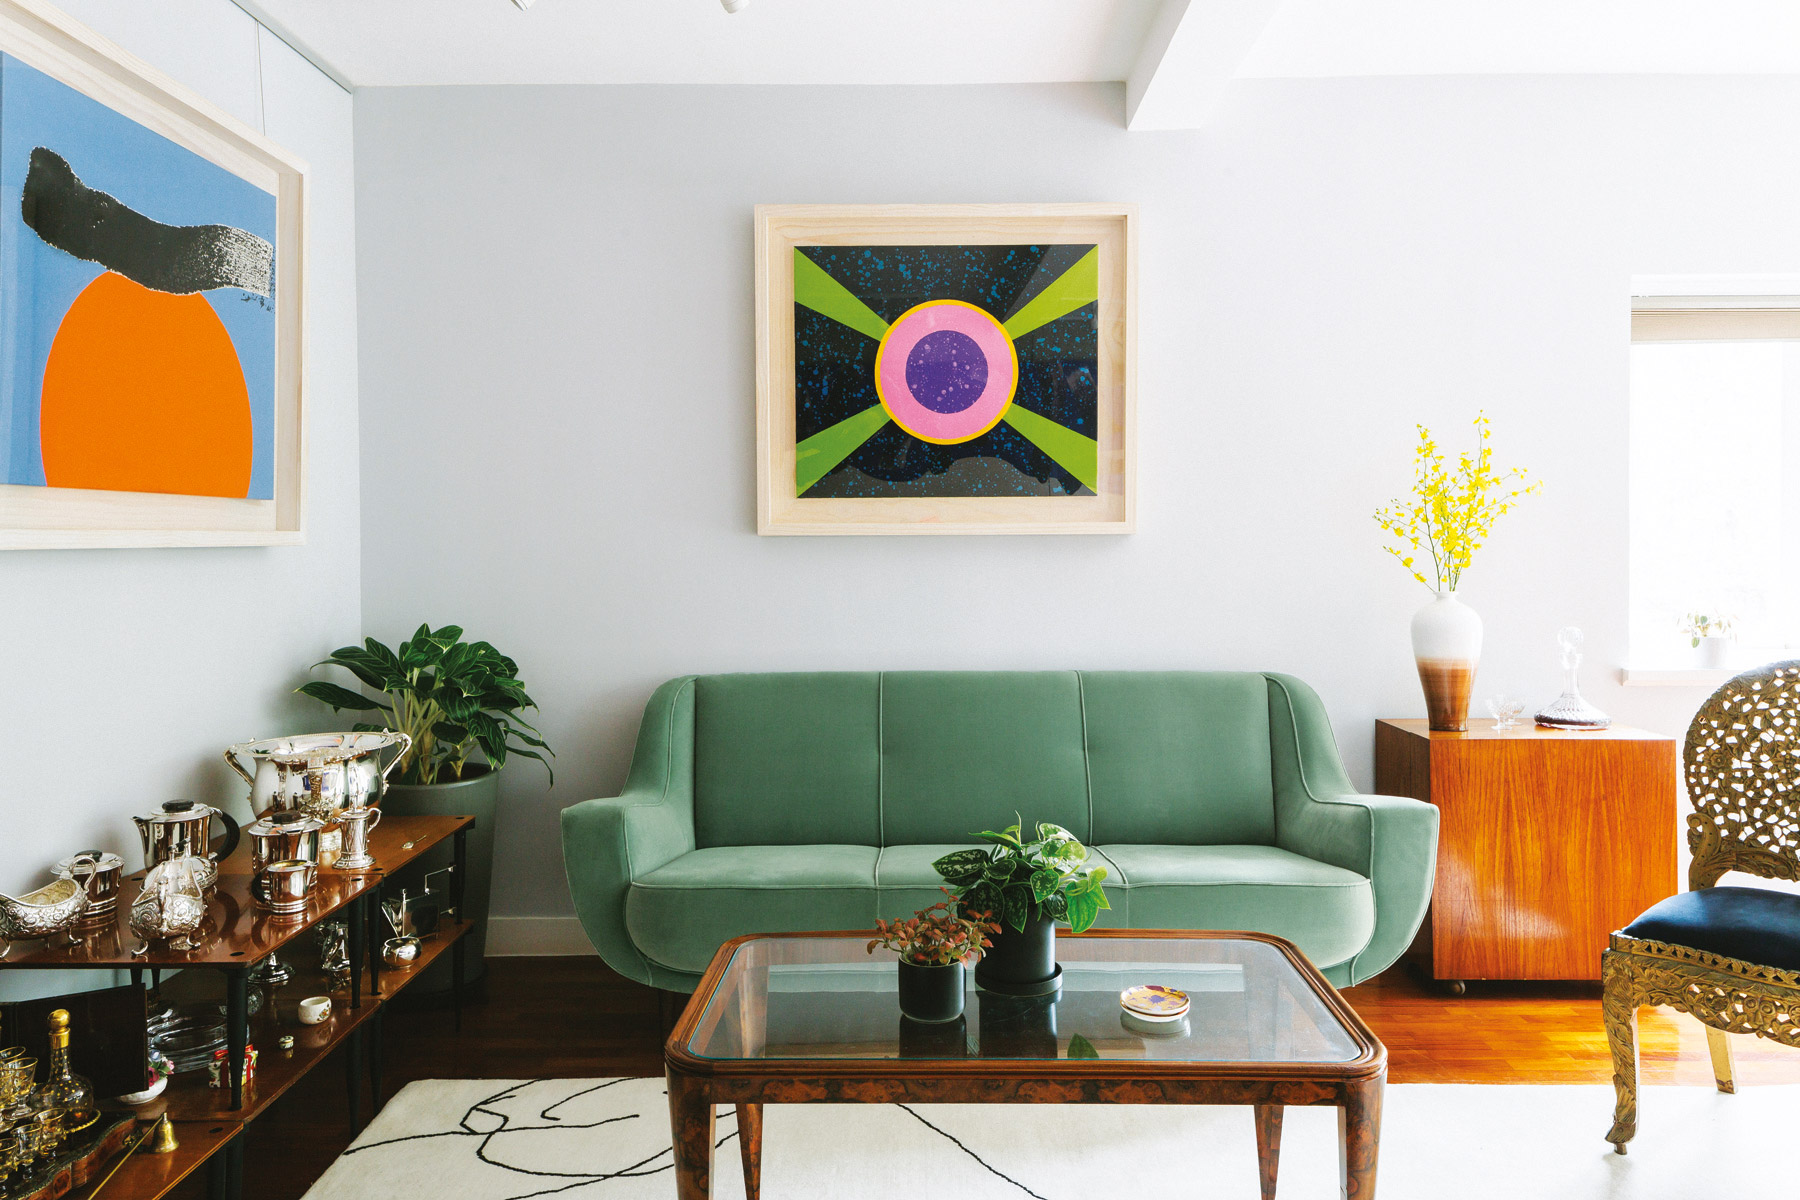 Bask in art in the curated Mid-Levels home of gallerists Calvin Hui and Mark Peaker